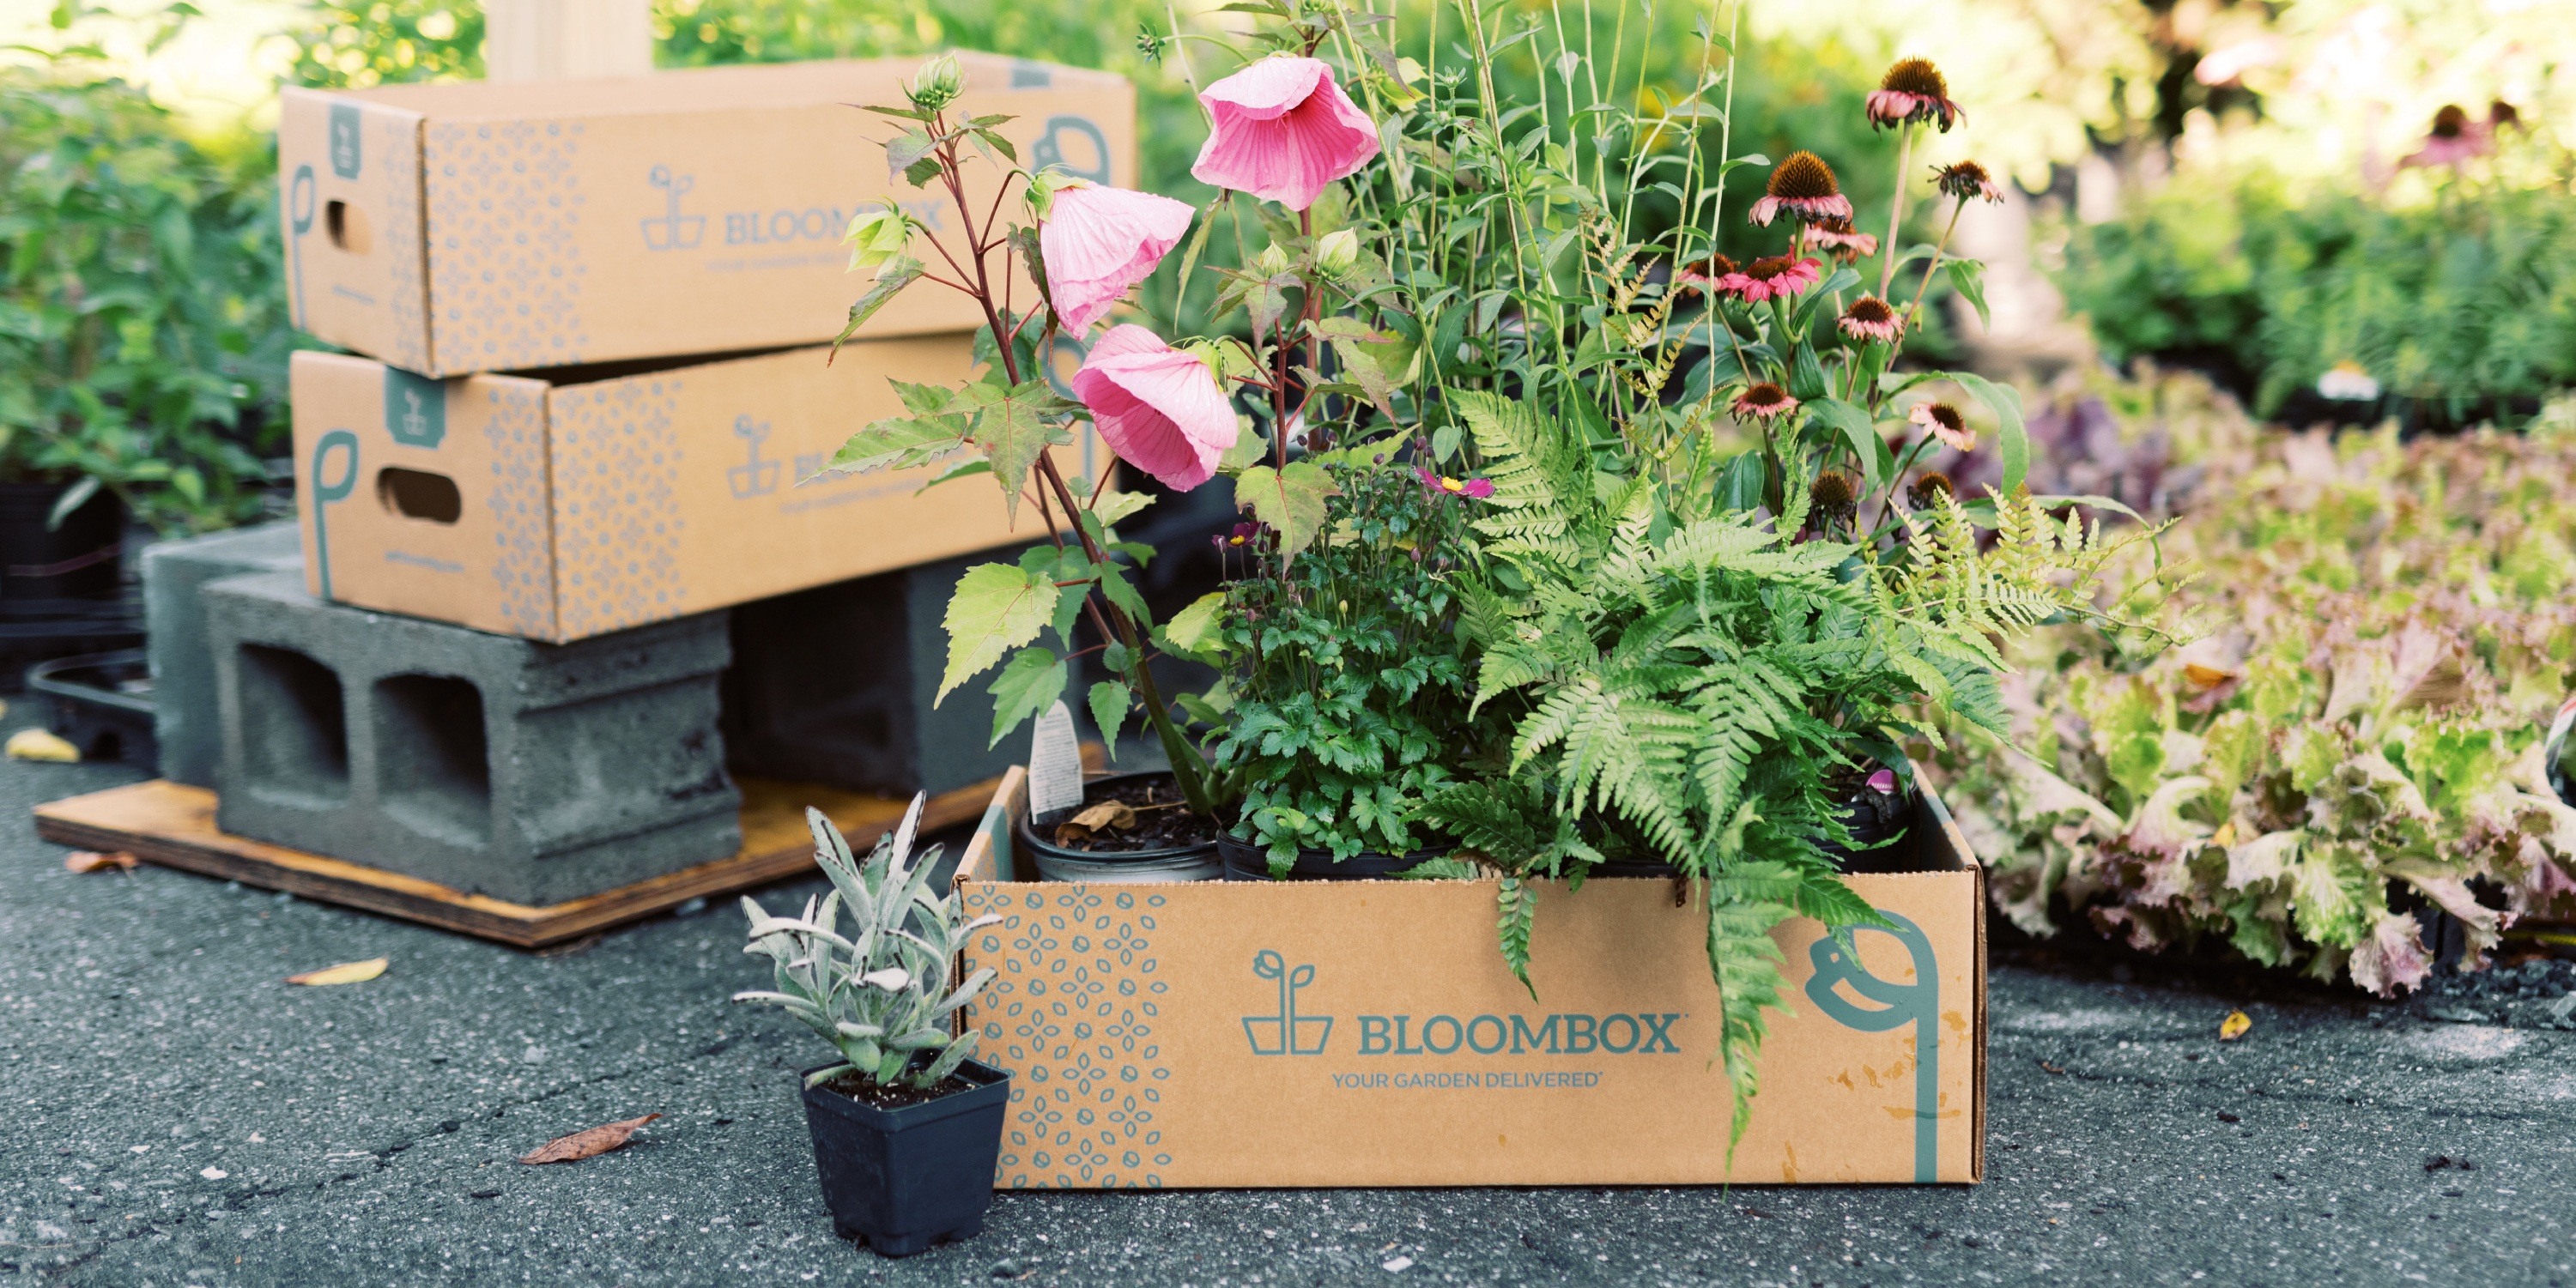 /assets/images/bloombox/g3_website_project_bloombox_deliverybox.jpg